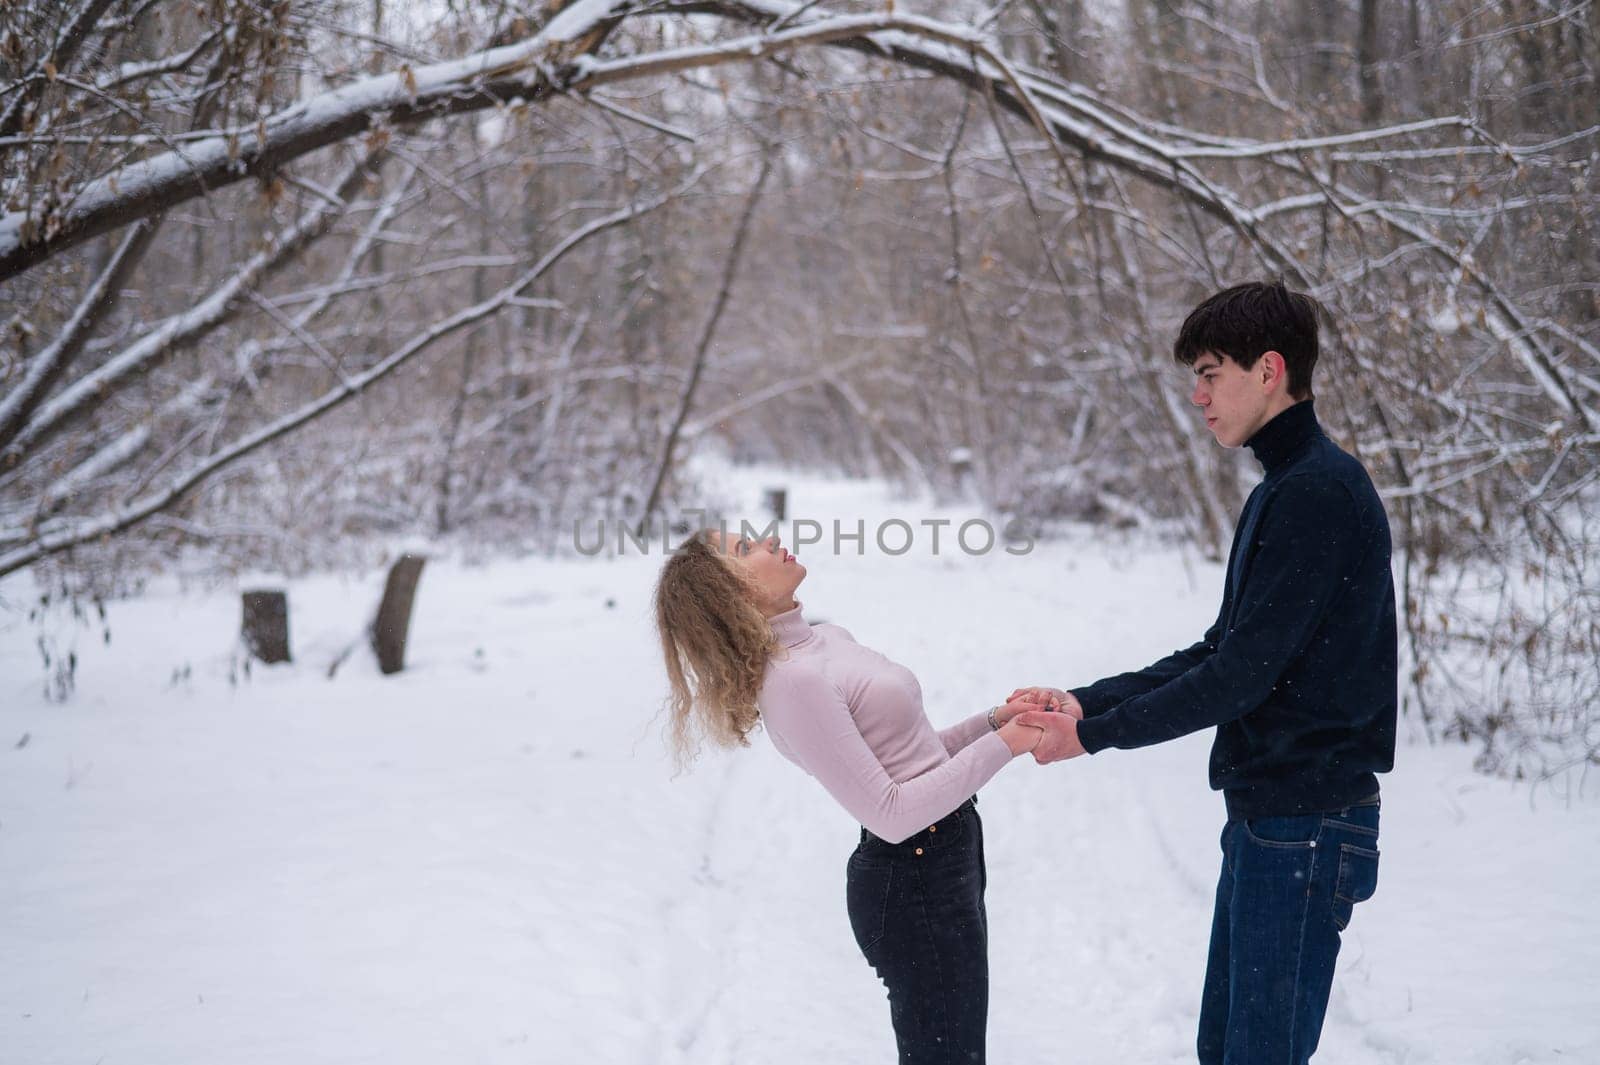 A young couple walks in the park in winter without jackets